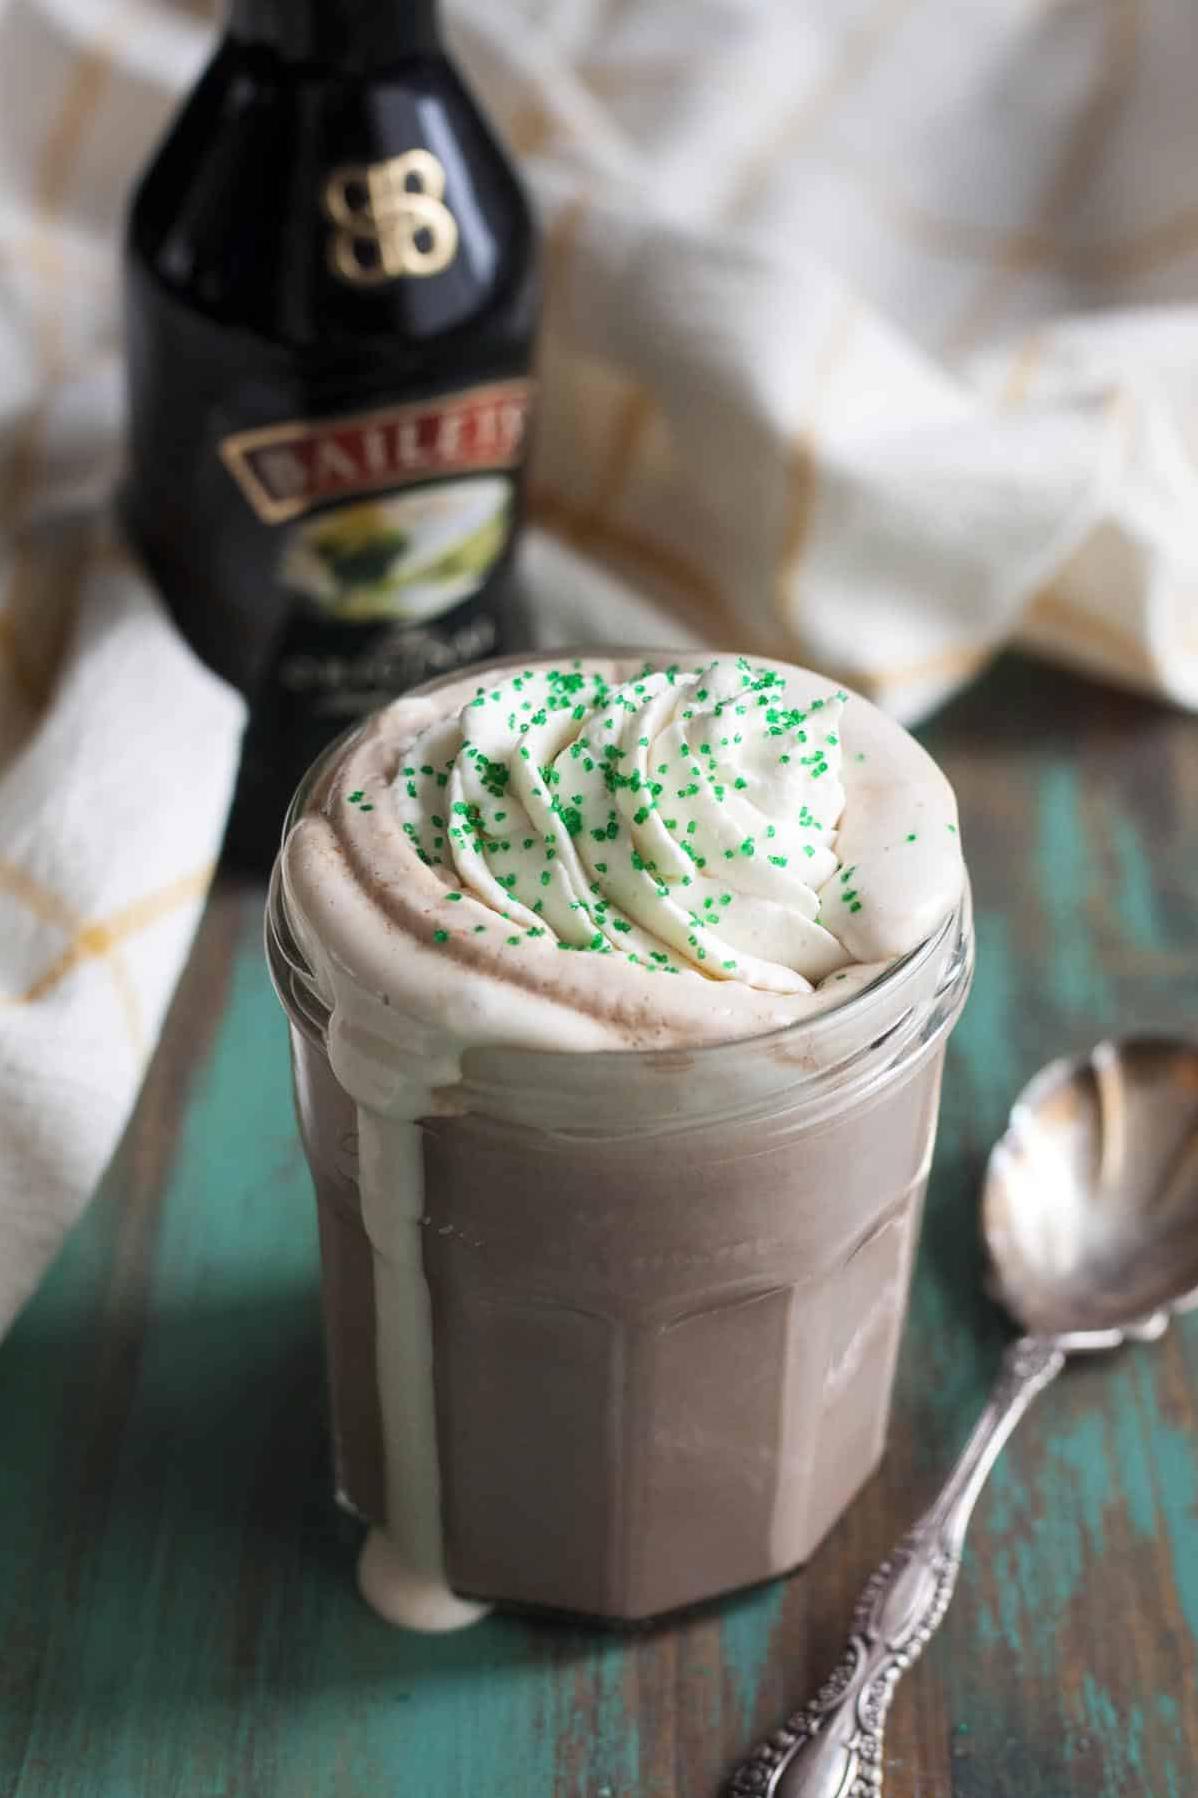  A dollop of whipped cream adds the perfect finishing touch to this luxurious drink.